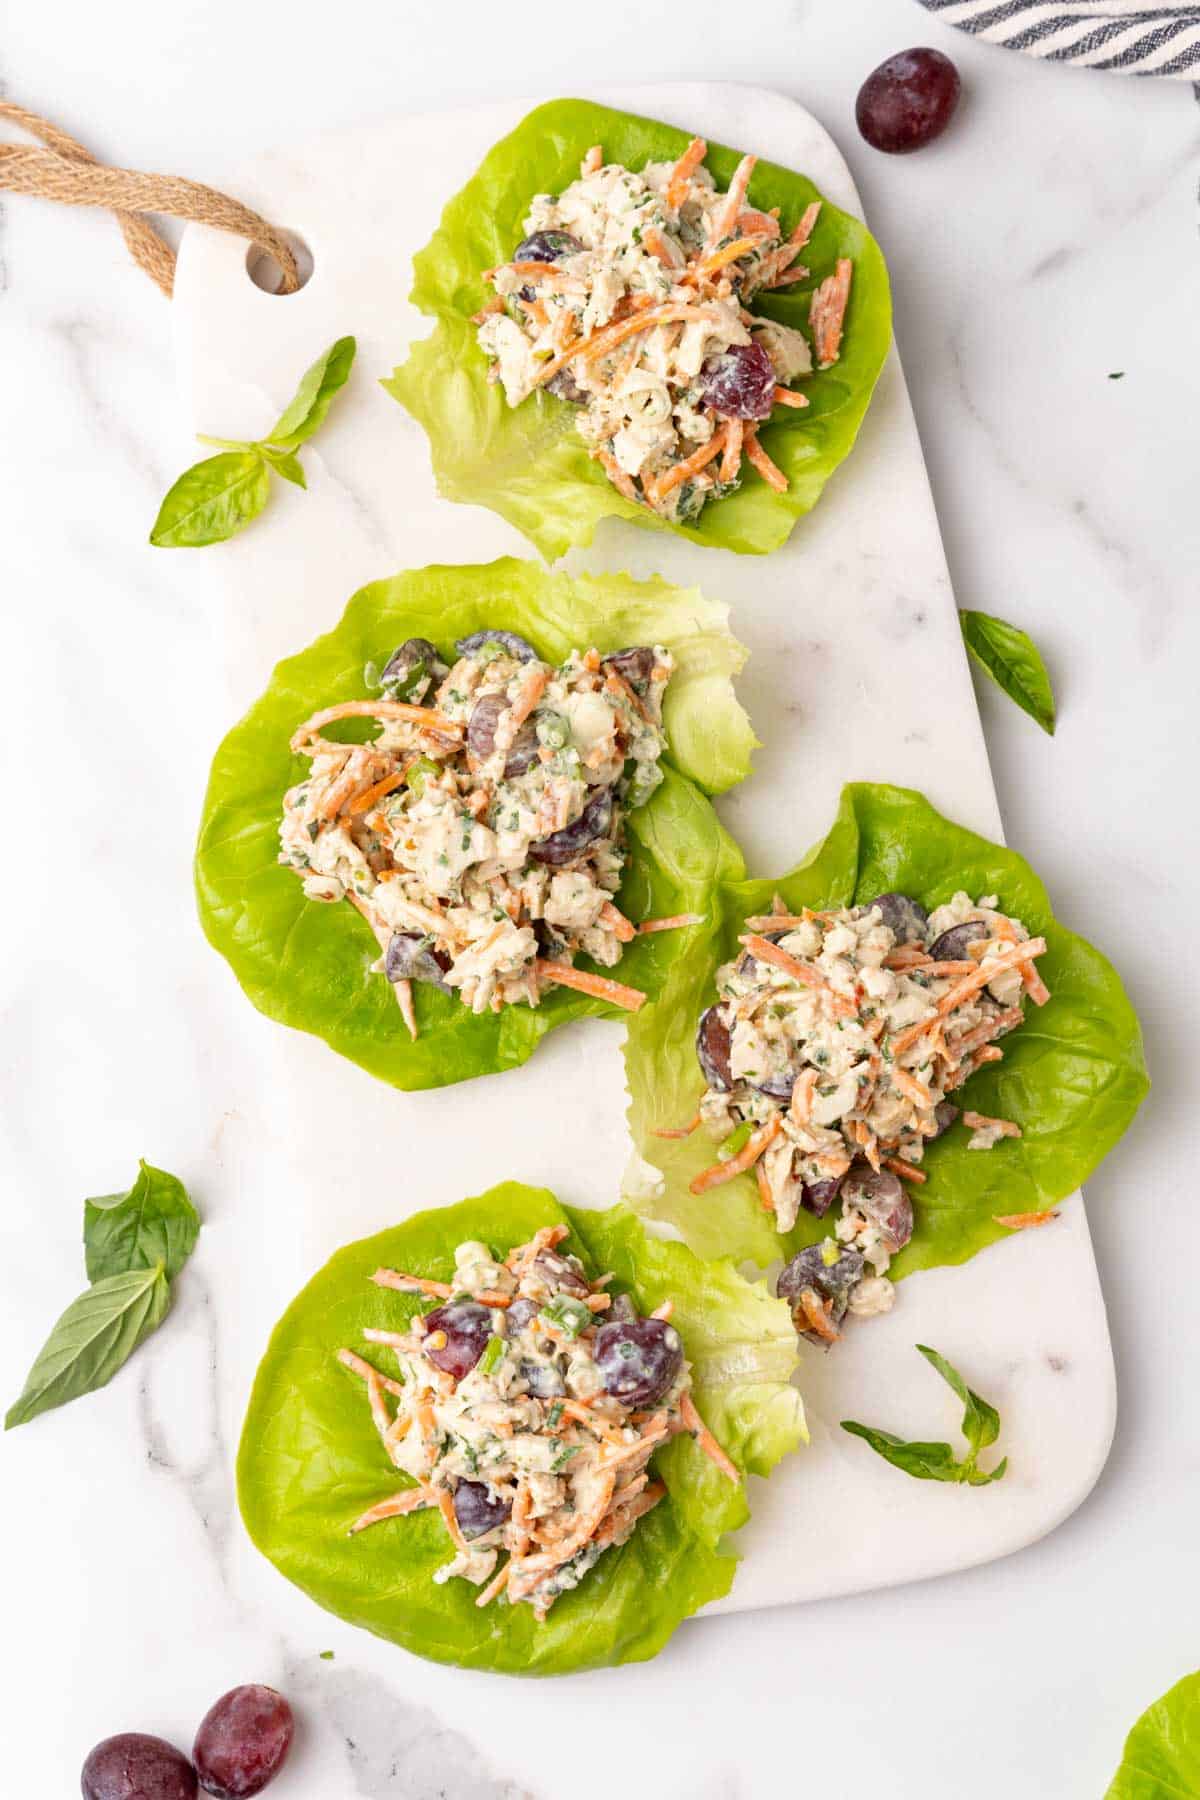 Four lettuce leaves with pesto chicken salad with grapes spooned into the middle of each one, arranged on a white serving tray on a white marble background